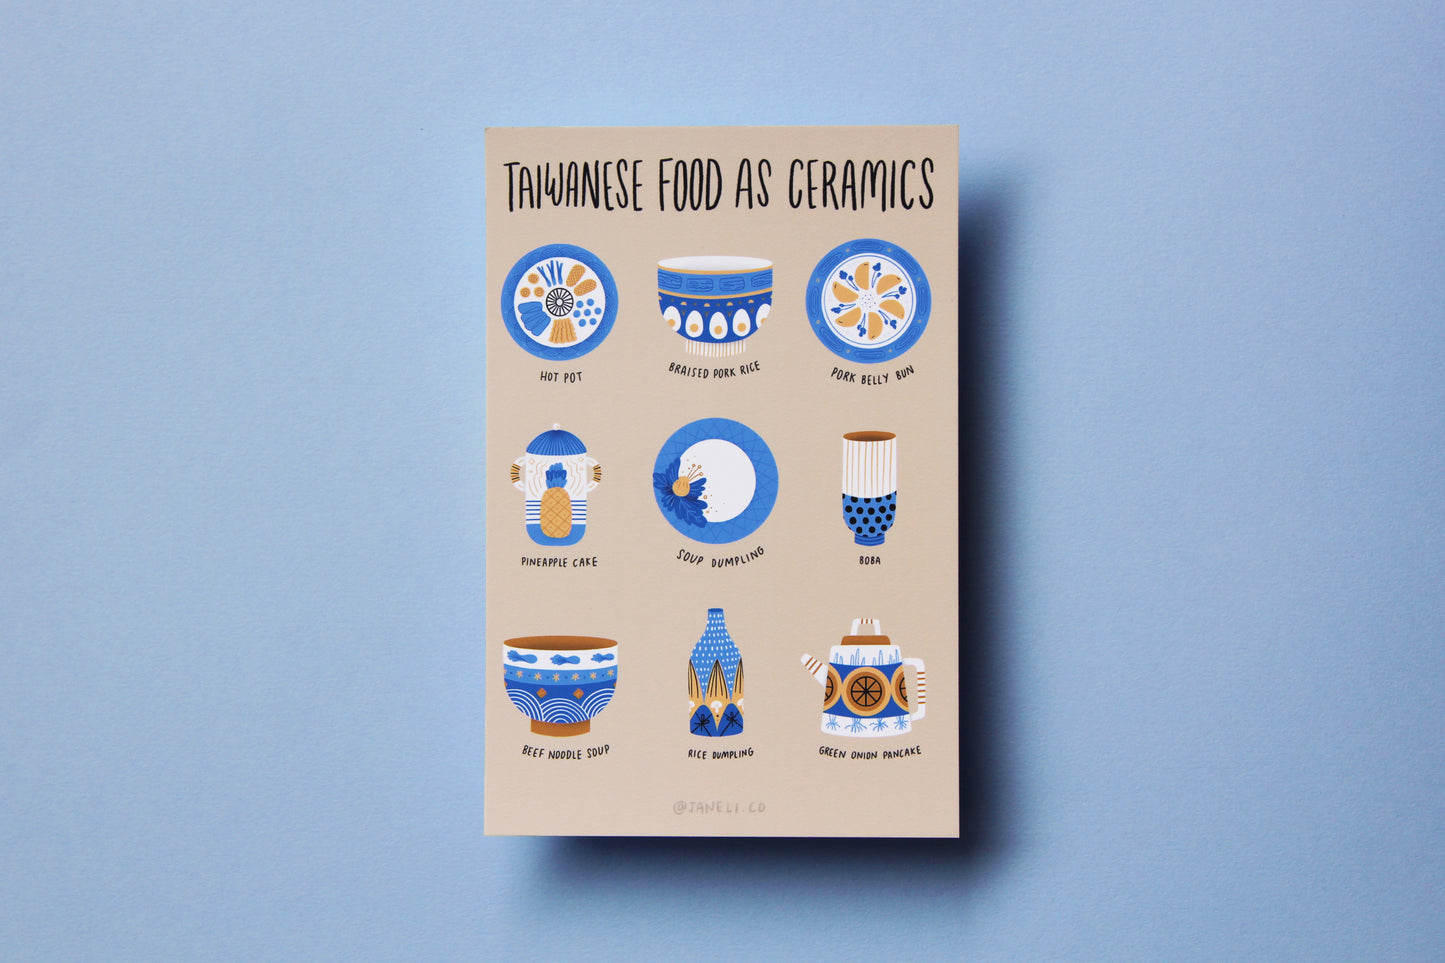 A JaneLi.Co mini print/postcard that says "Taiwanese Foods As Ceramics" with 9 different illustrations of ceramics over a blue background.